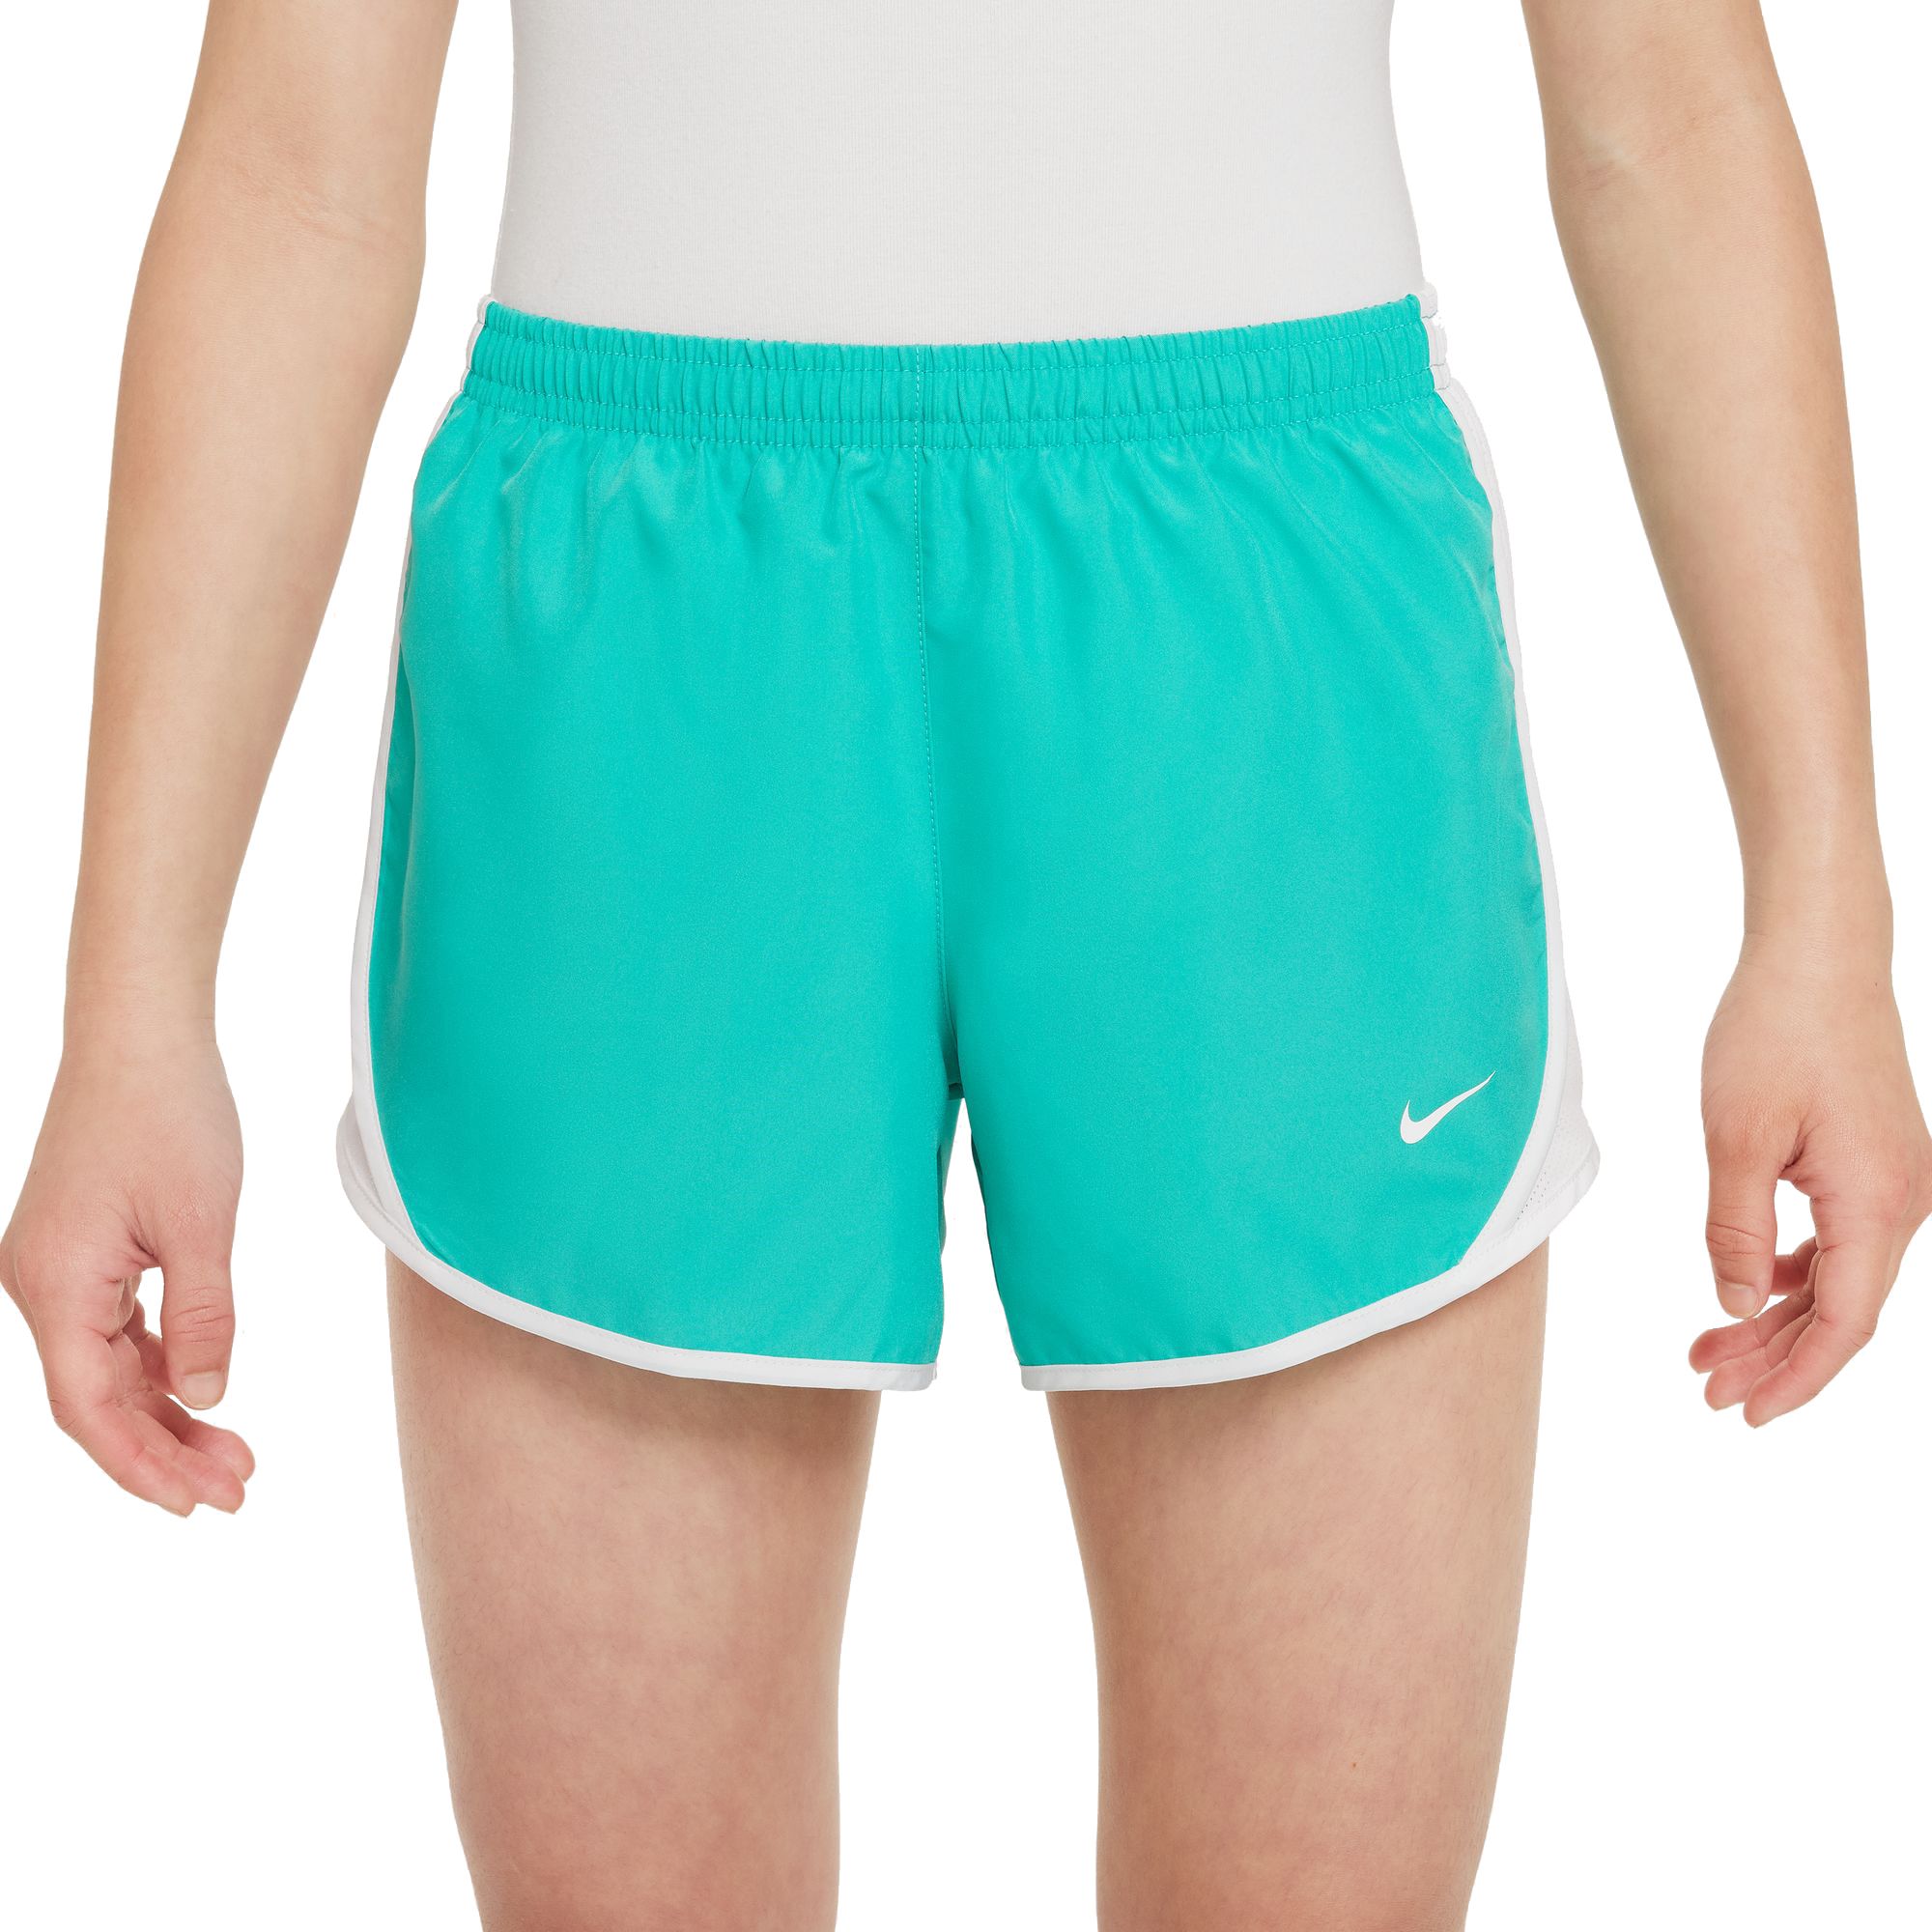 Shop Clearance Apparel & Workout Clothes on Sale - DICK'S